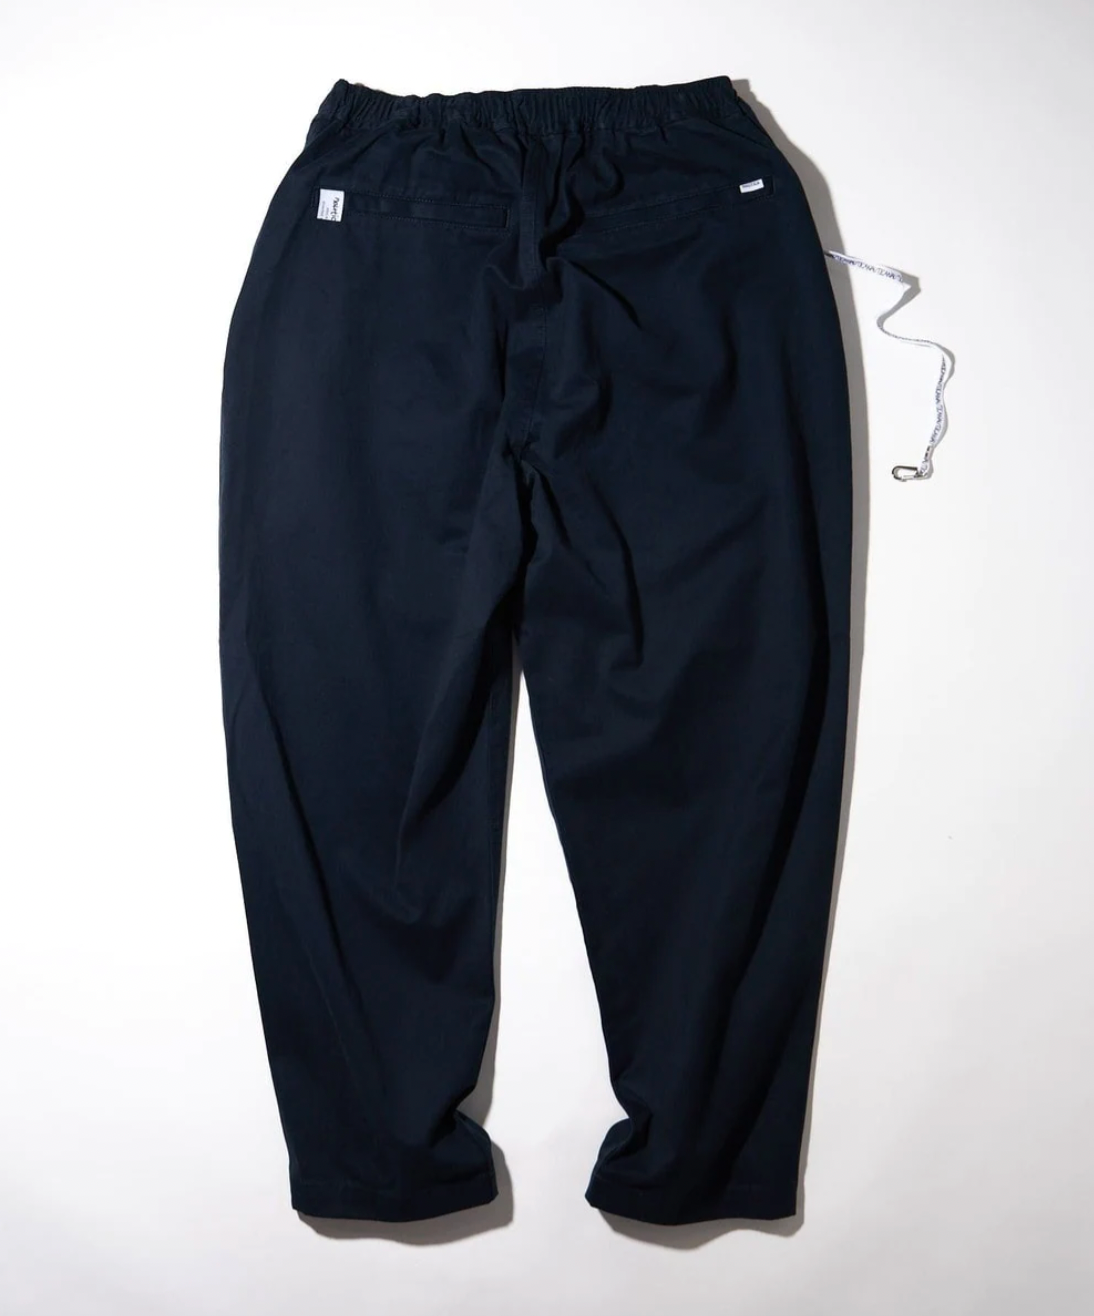 Nautica Formal Trousers outlet - 1800 products on sale | FASHIOLA.co.uk